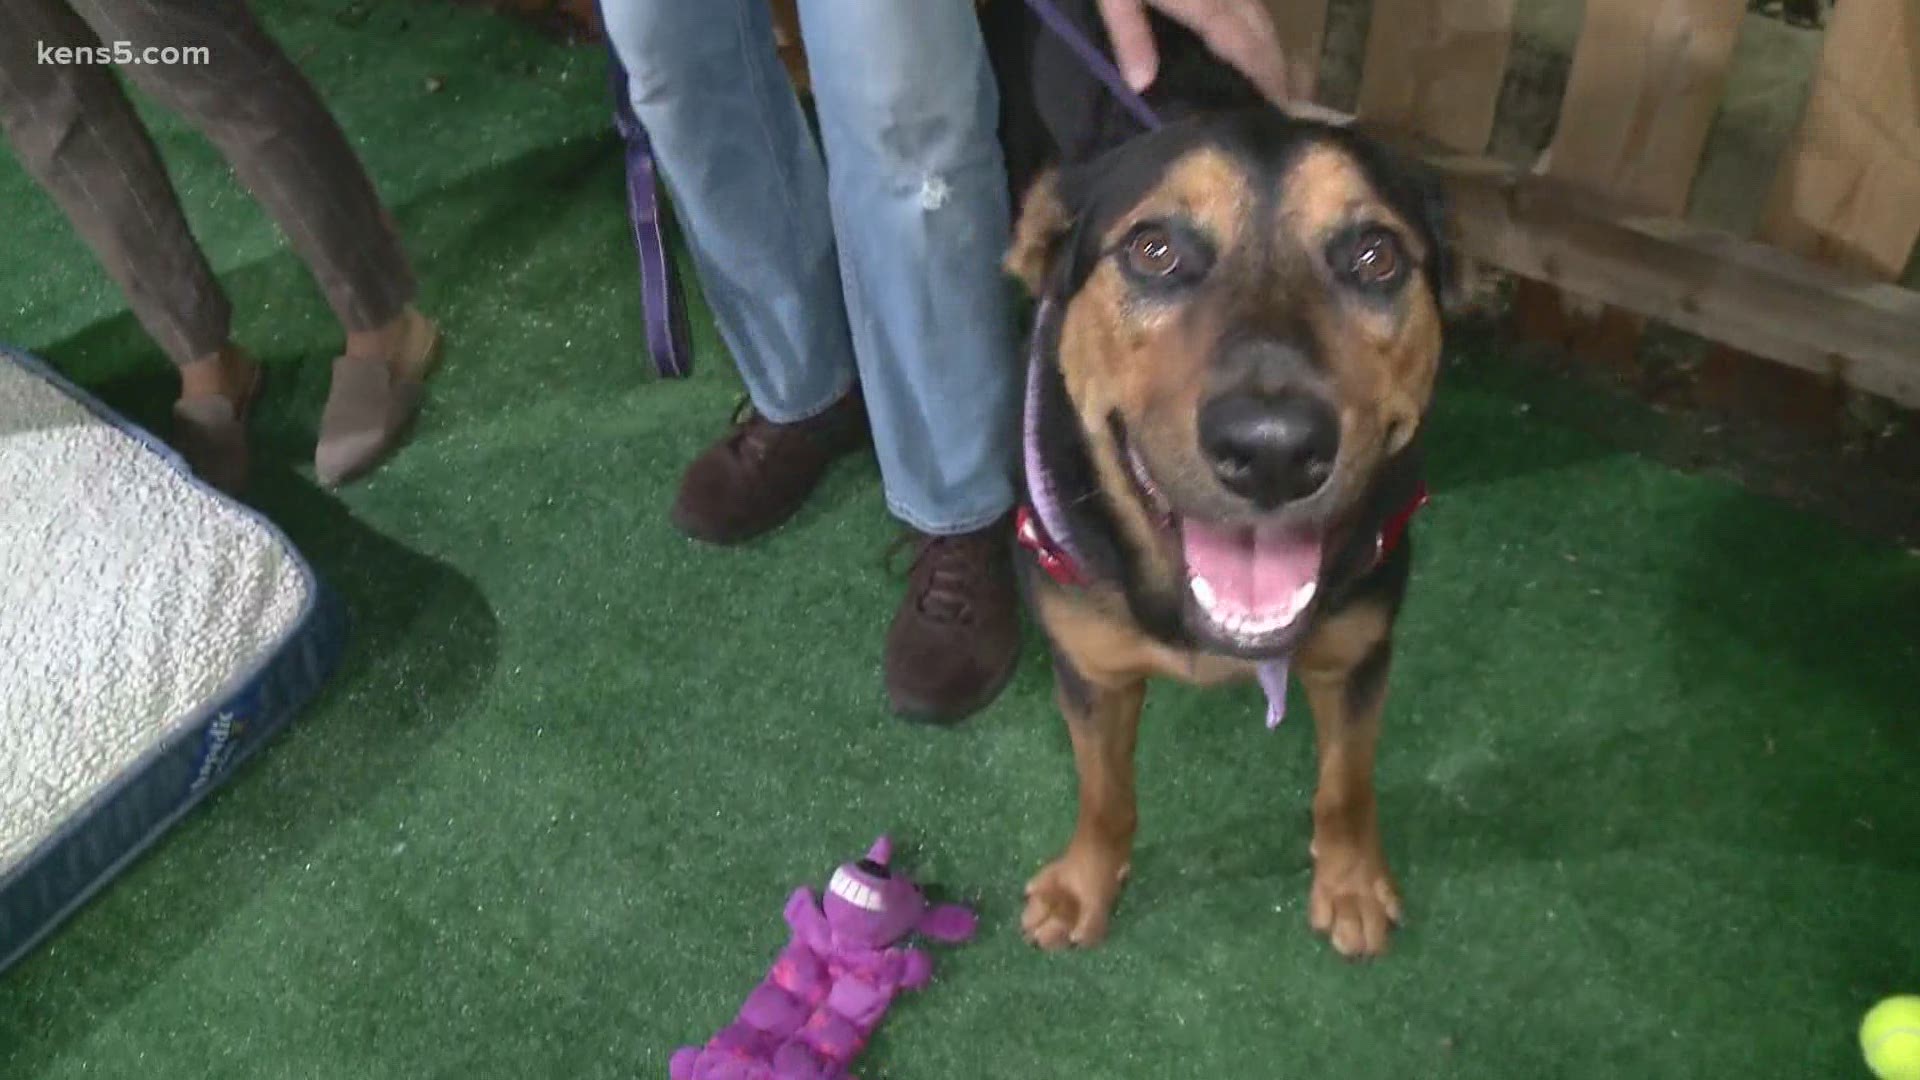 Squirt has come to the KENS 5 Puppy Playground twice now. He's almost 2, loves belly rubs, playtime, older kids and needs a home – but he's not a fan of cats.